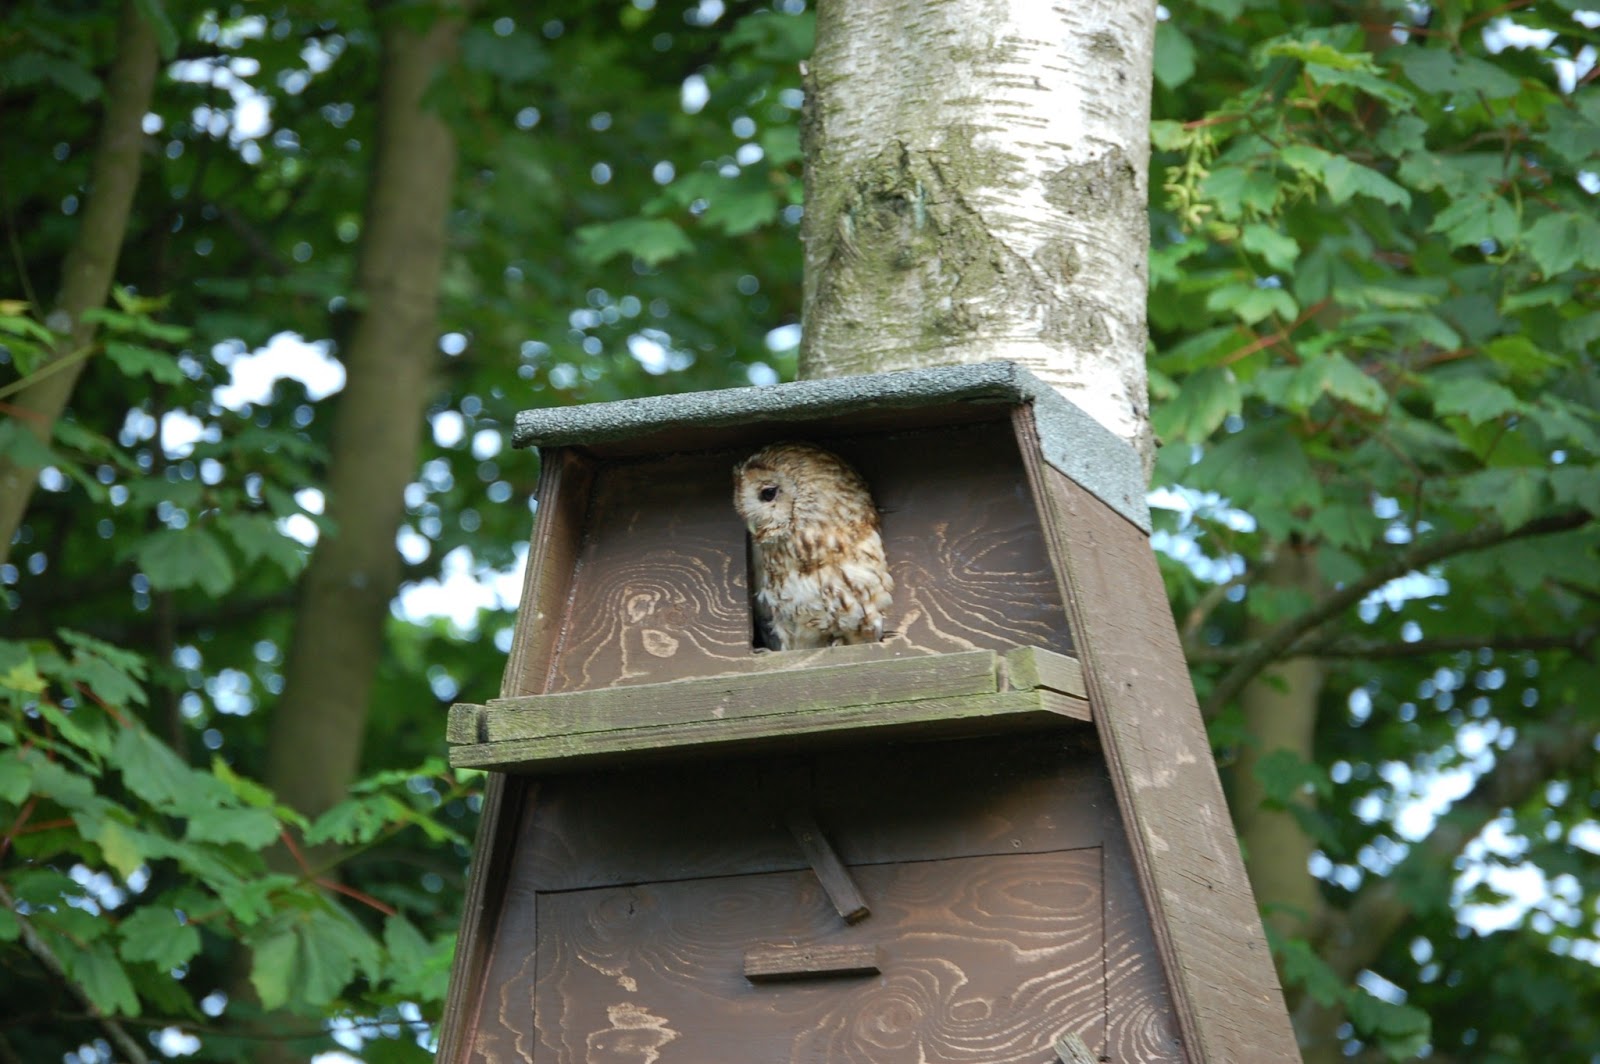 Jim and Kevs Owl Box Adventures: Owl box number 3